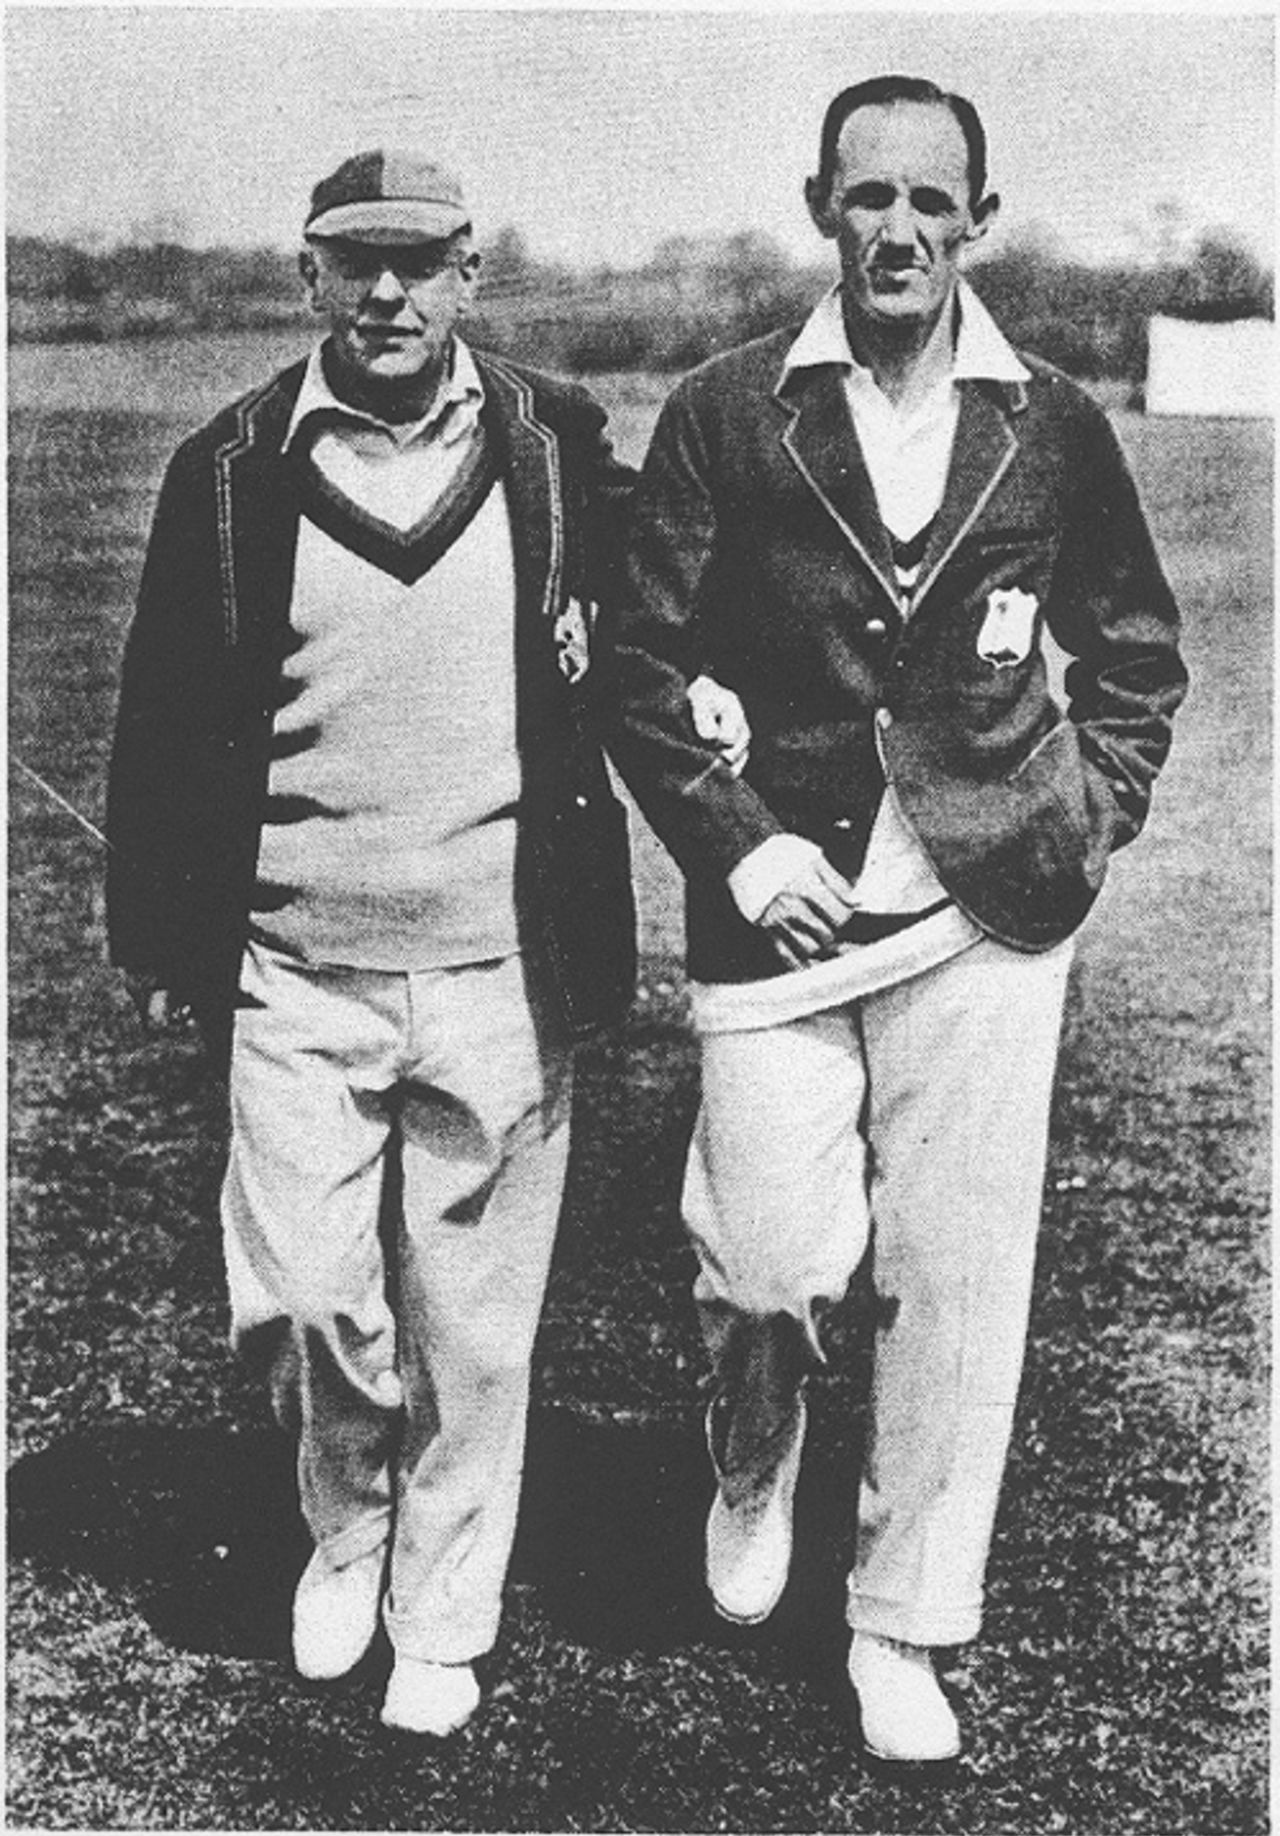 HDG Leveson-Gower and Karl Nunes, 1928